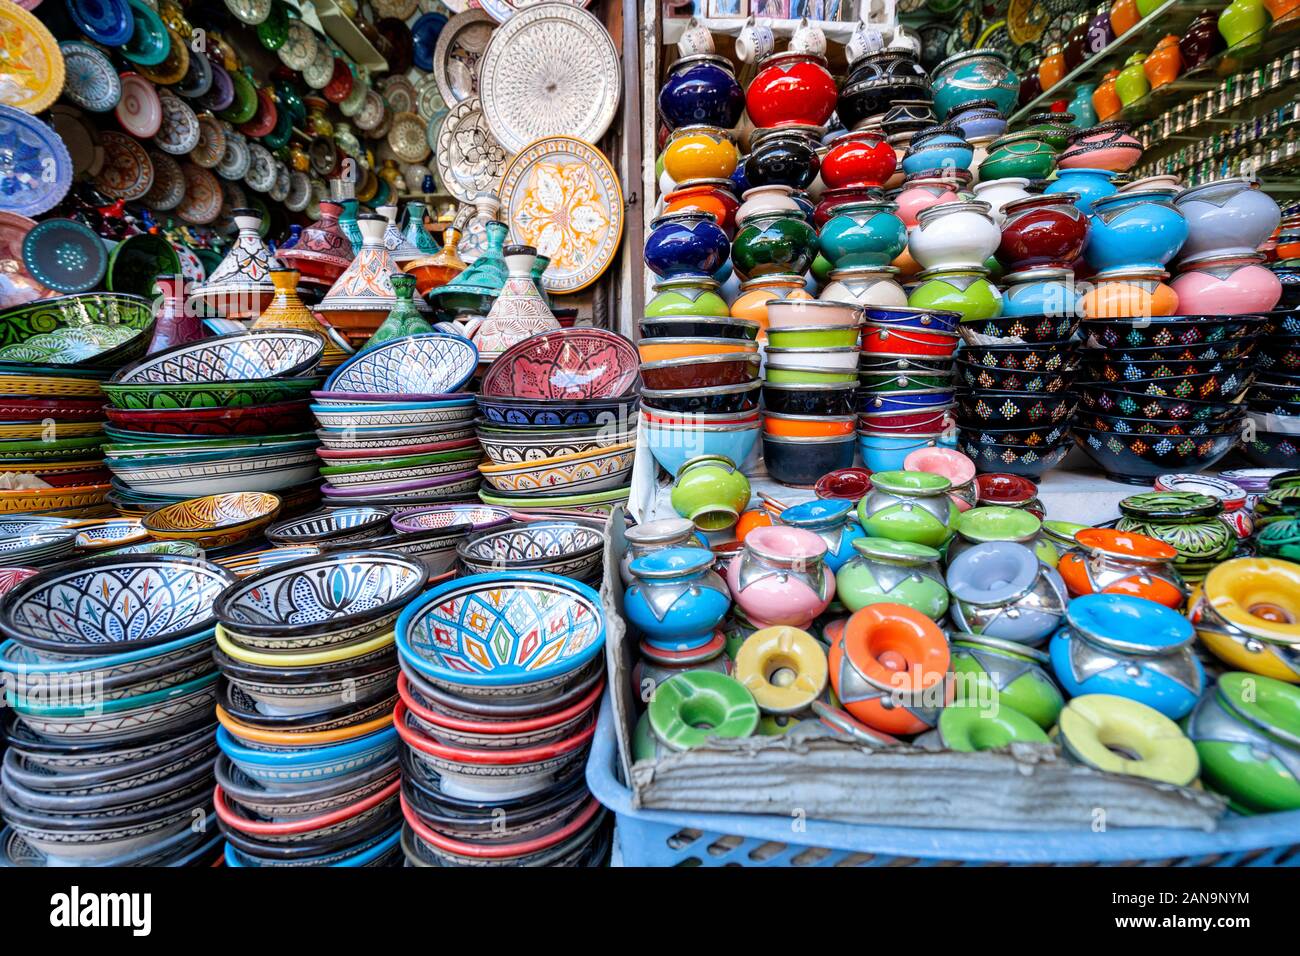 Colorful ceramic bowls sold in old town of Marrakech, Morocco, Africa Stock Photo